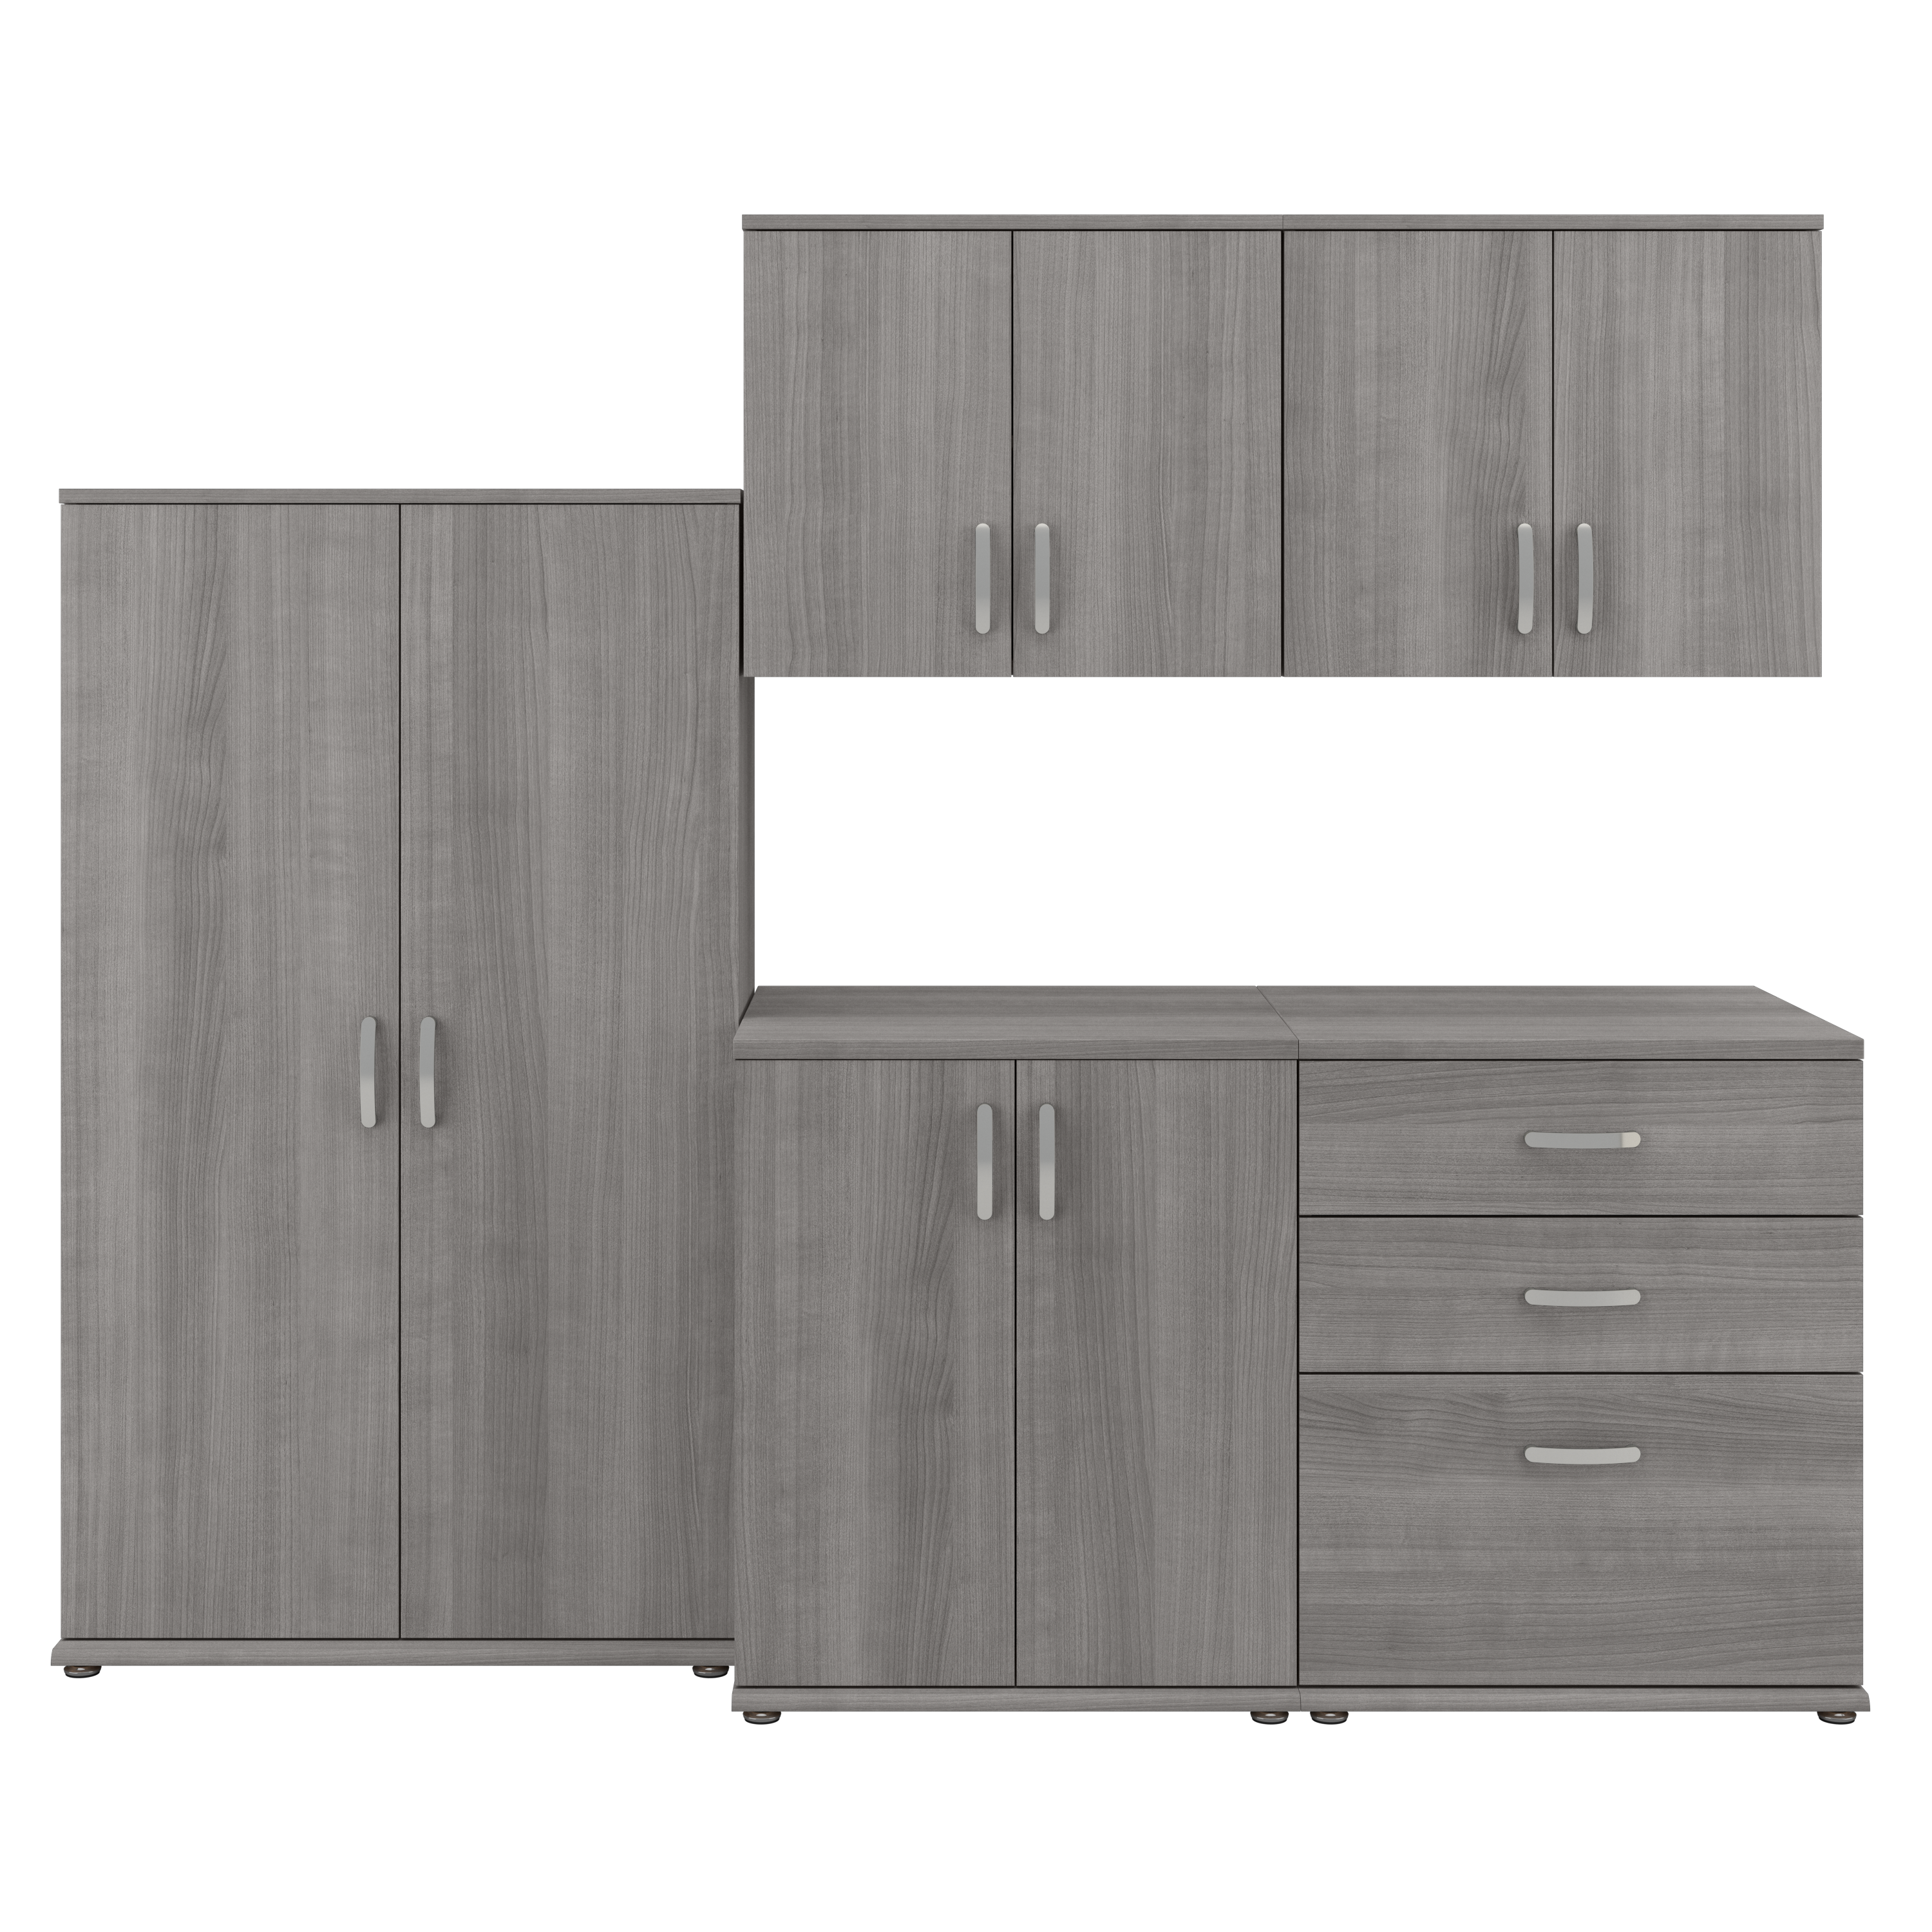 Shop Bush Business Furniture Universal 5 Piece Modular Closet Storage Set with Floor and Wall Cabinets 02 CLS003PG #color_platinum gray